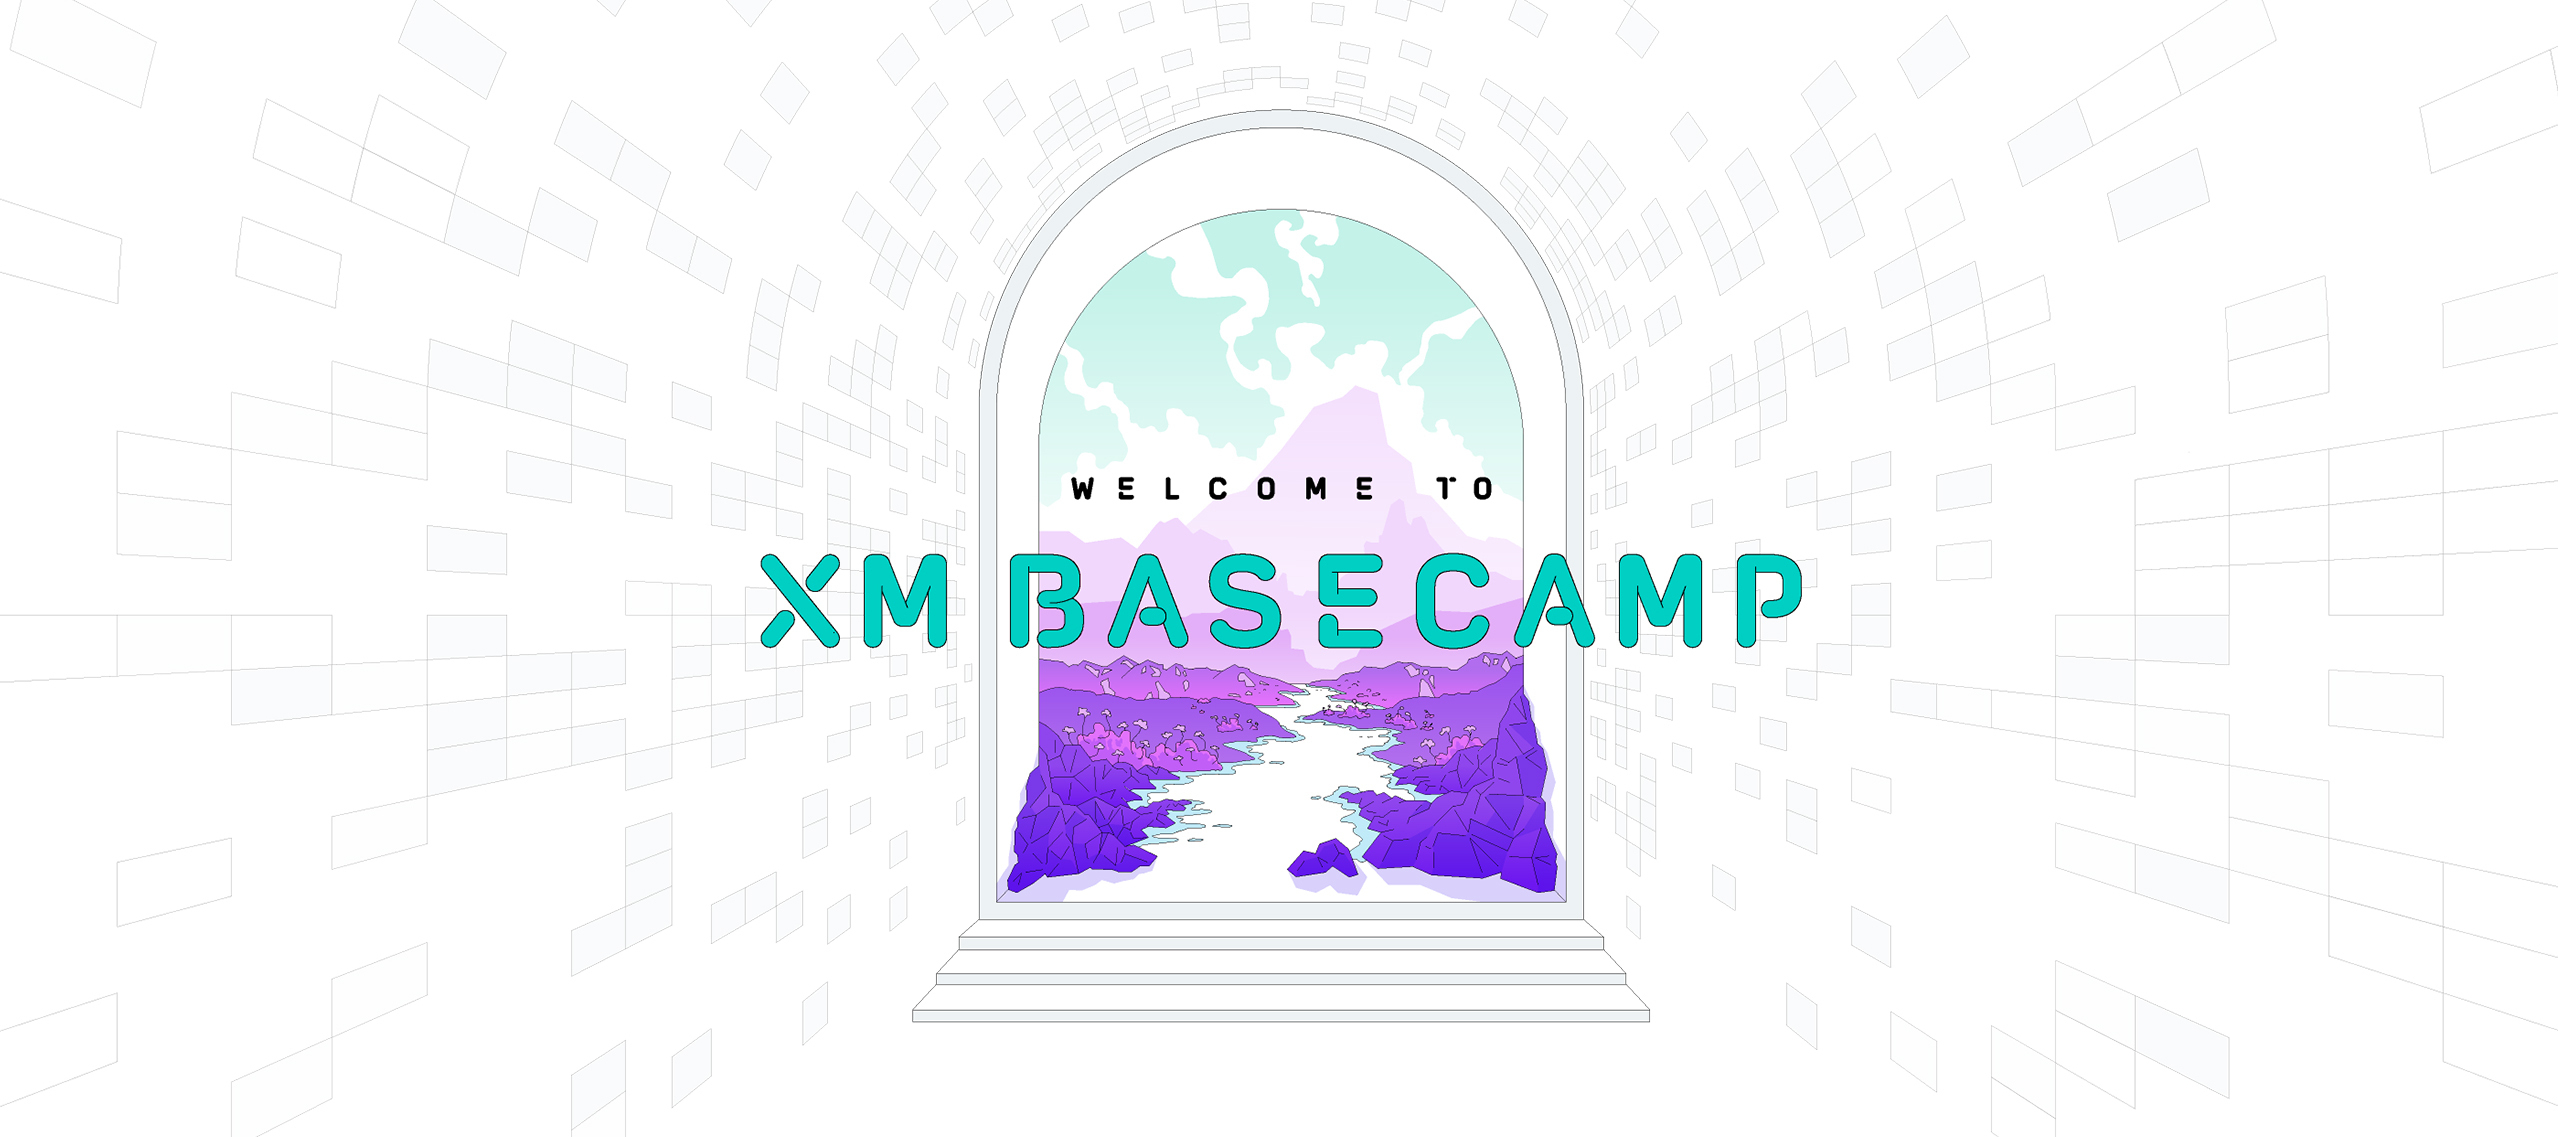 New XM Basecamp Experience